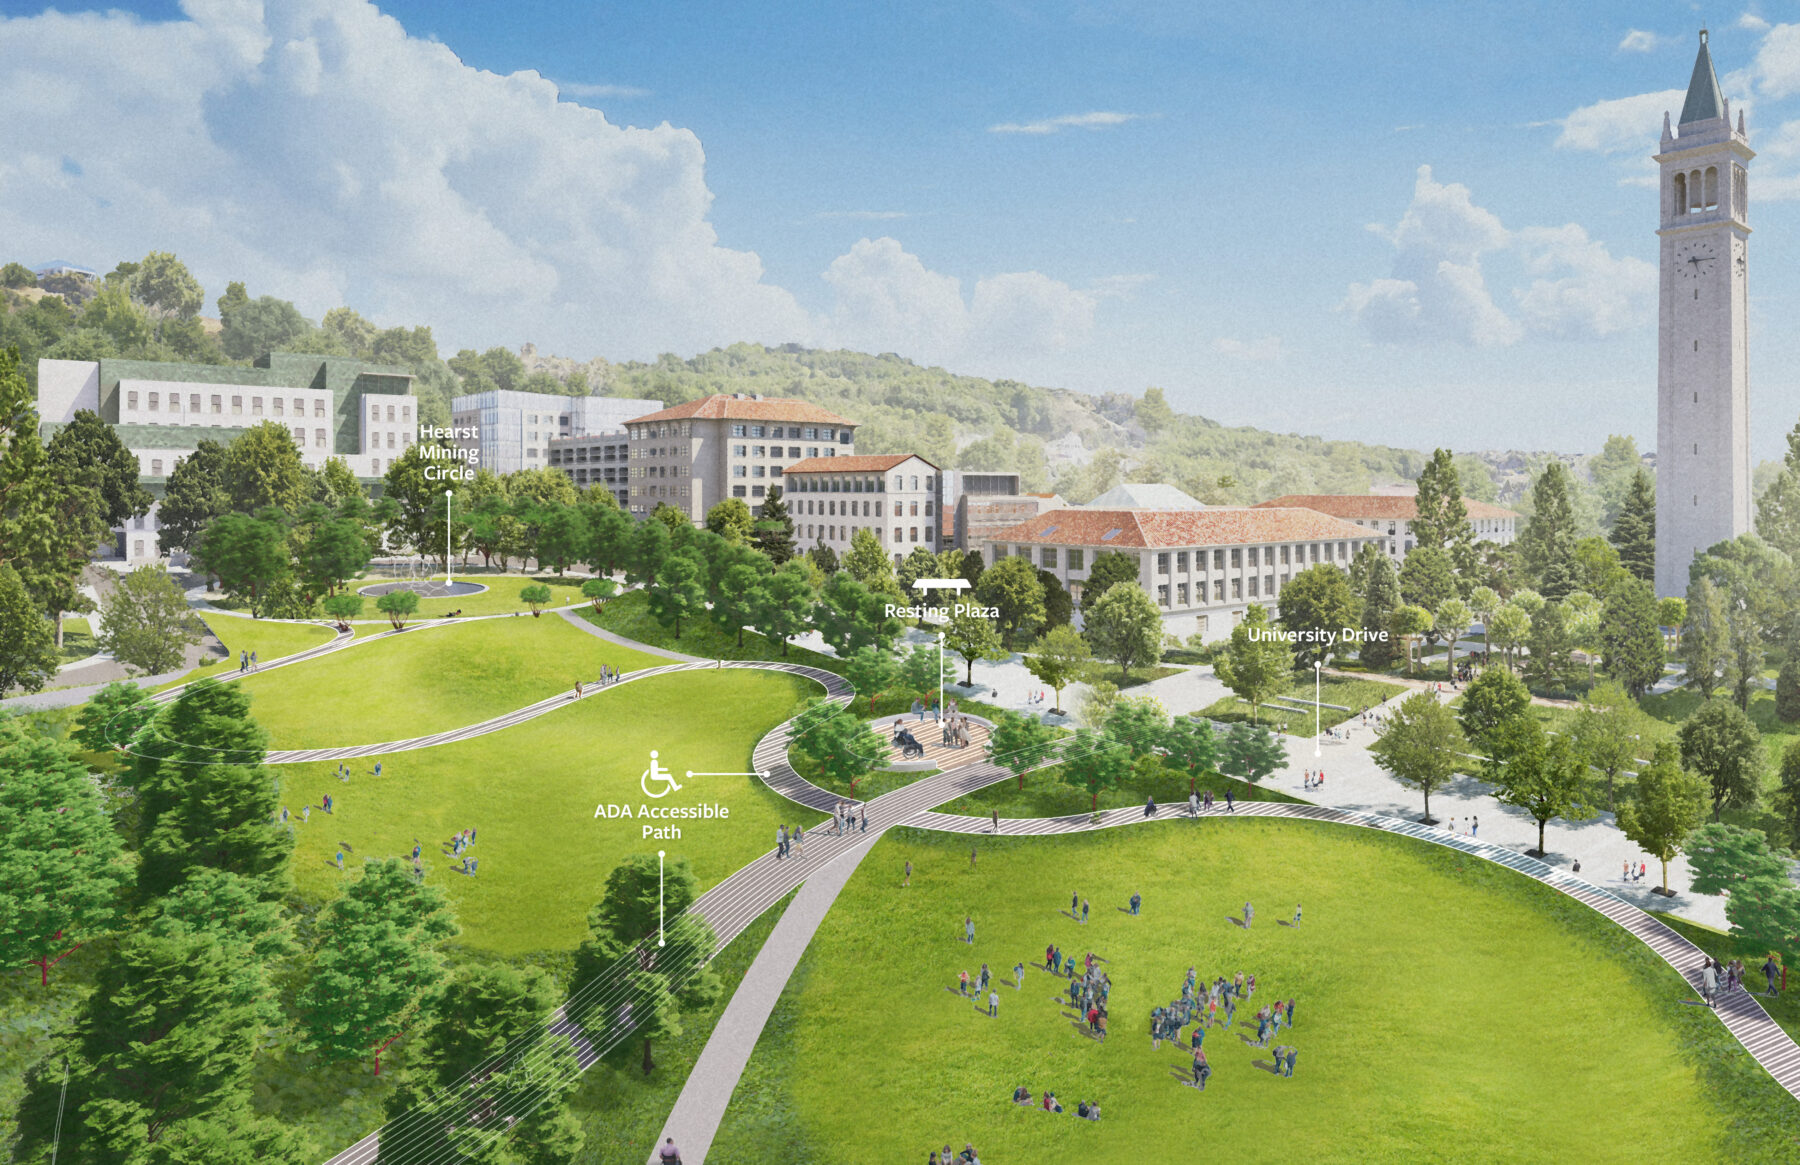 Rendered aerial view of campus green space with pathways over cascading hills and campus buildings in the background